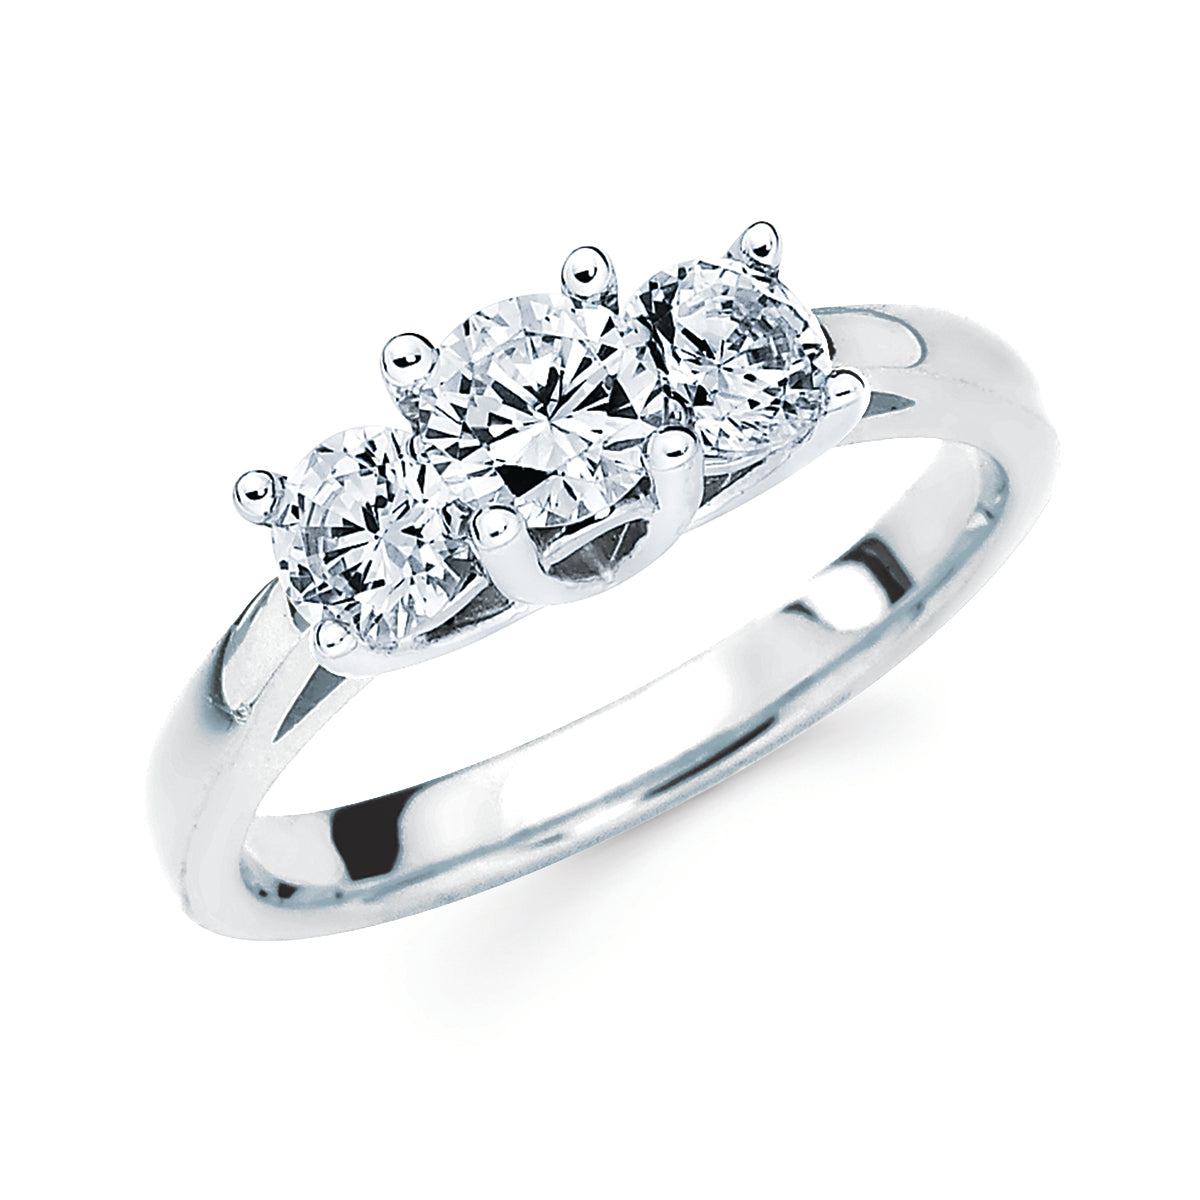 14K White Gold Past, Present, Future Engagement Ring